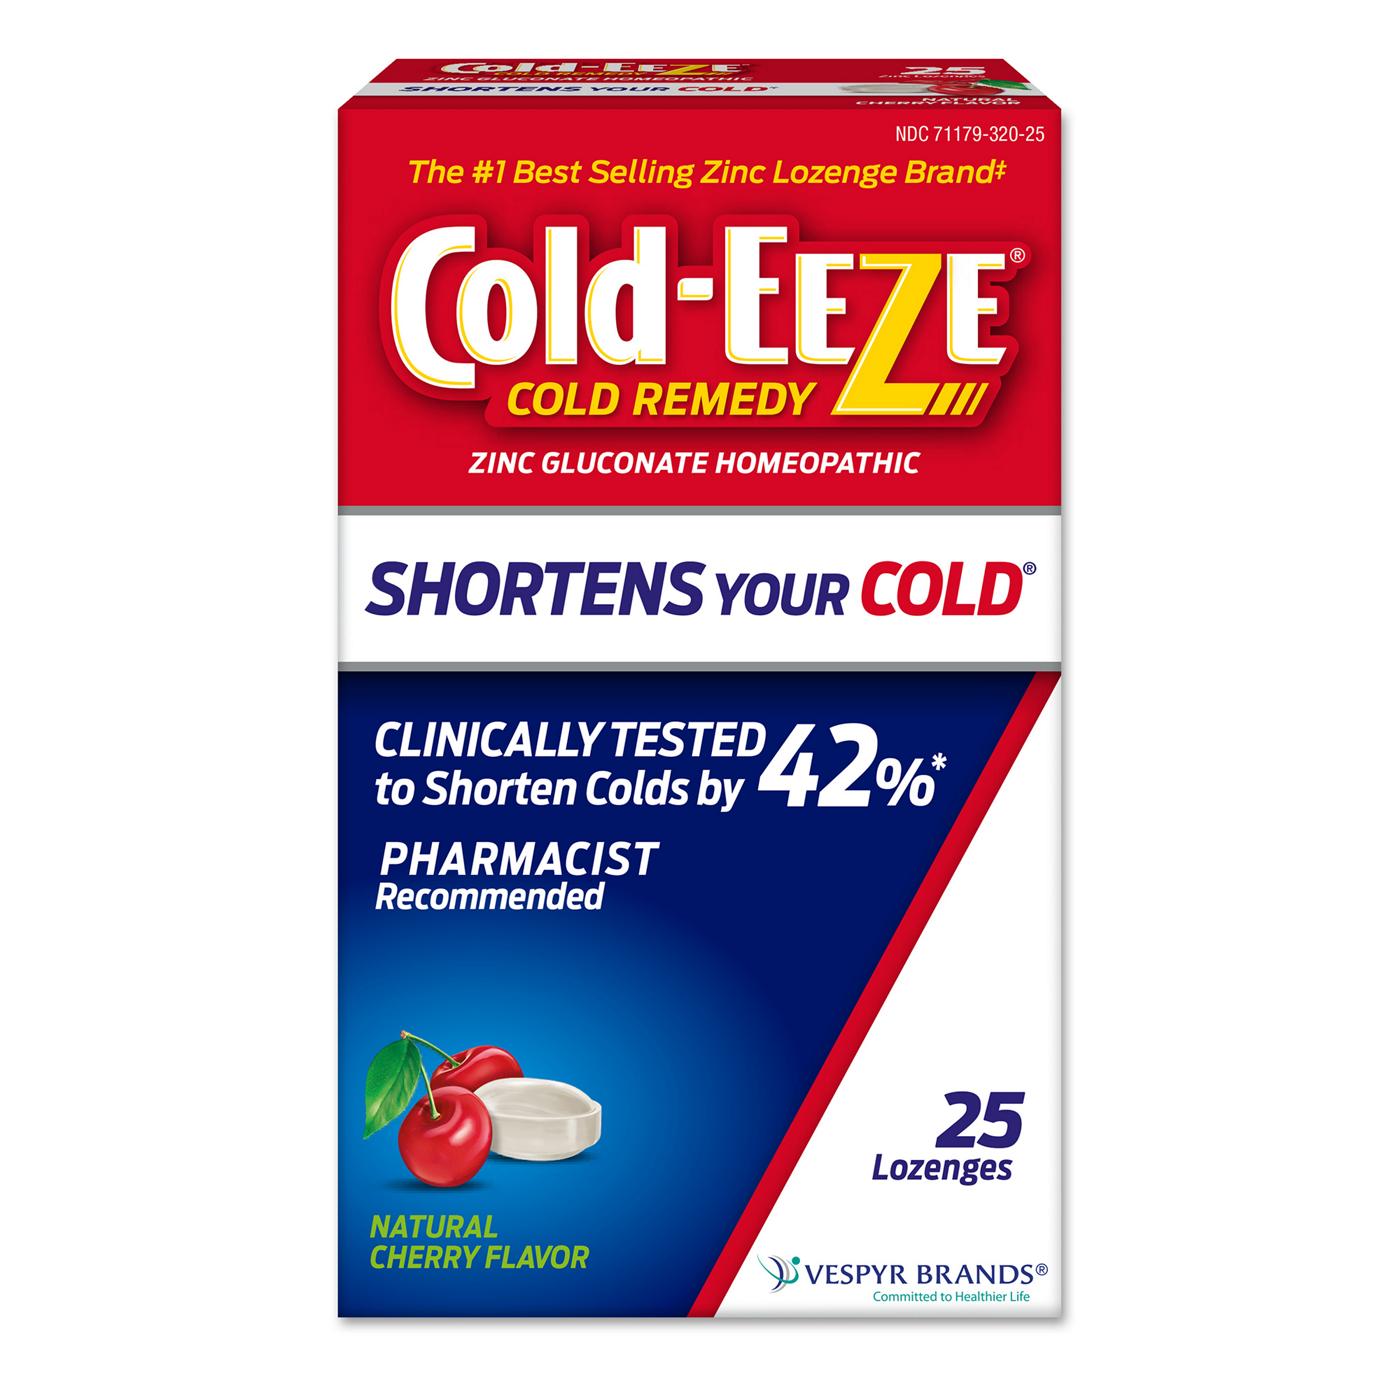 Cold-EEZE Cold Remedy Zinc Lozenges - Natural Cherry; image 1 of 7